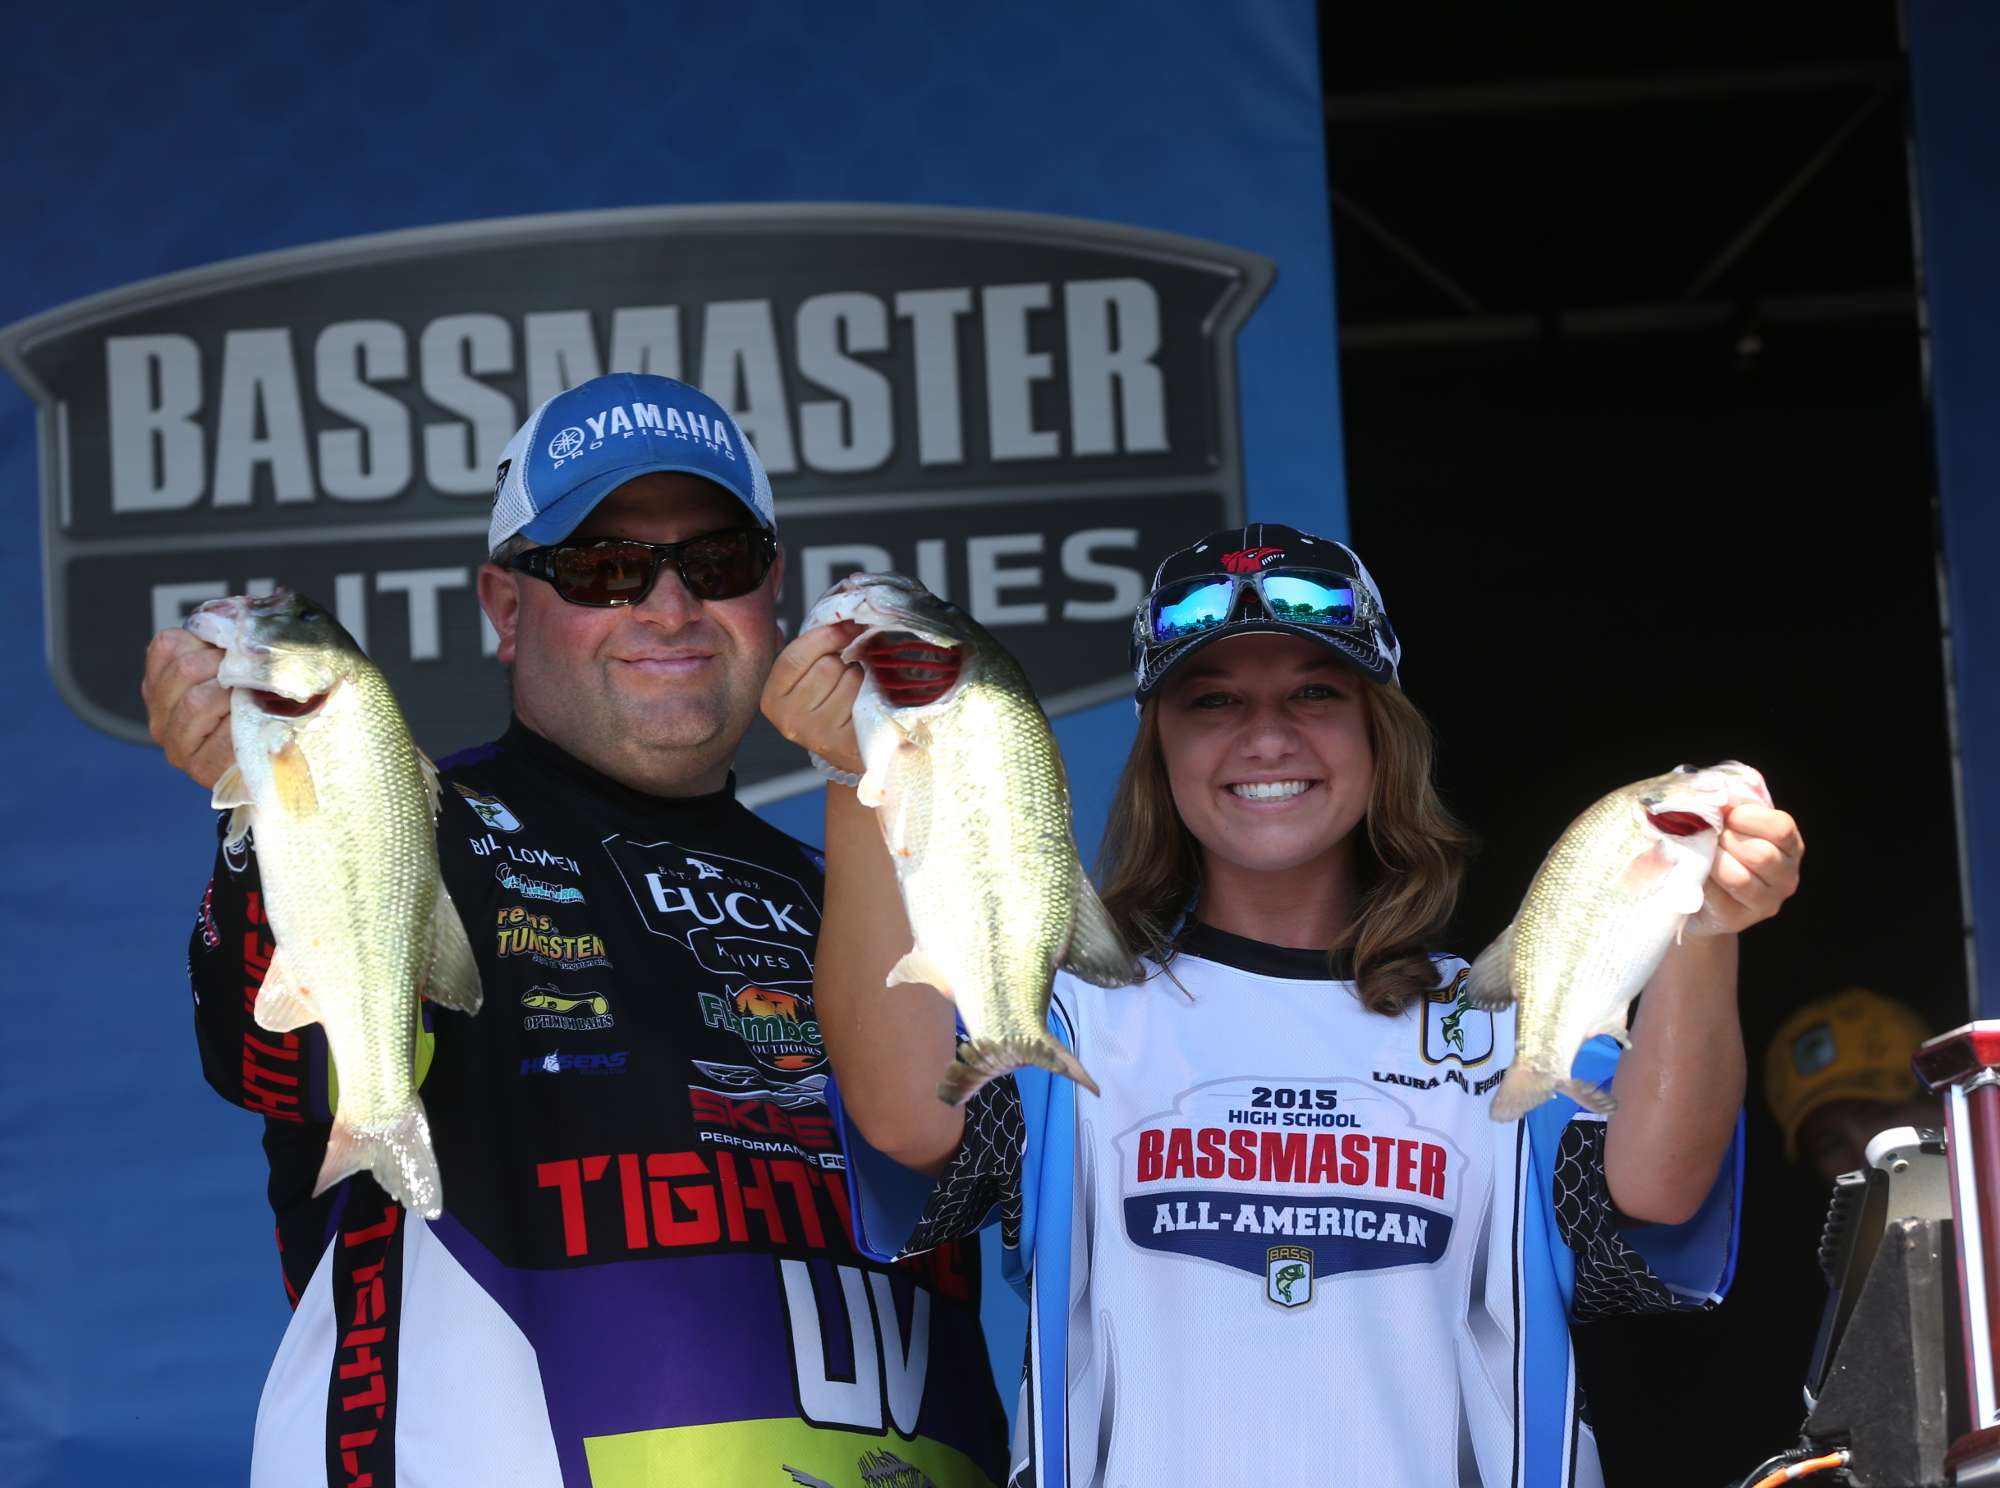 The only co-ed team on the water, Bill Lowen and All-American Laura Ann Foshee found three bass that weighed 5-14.